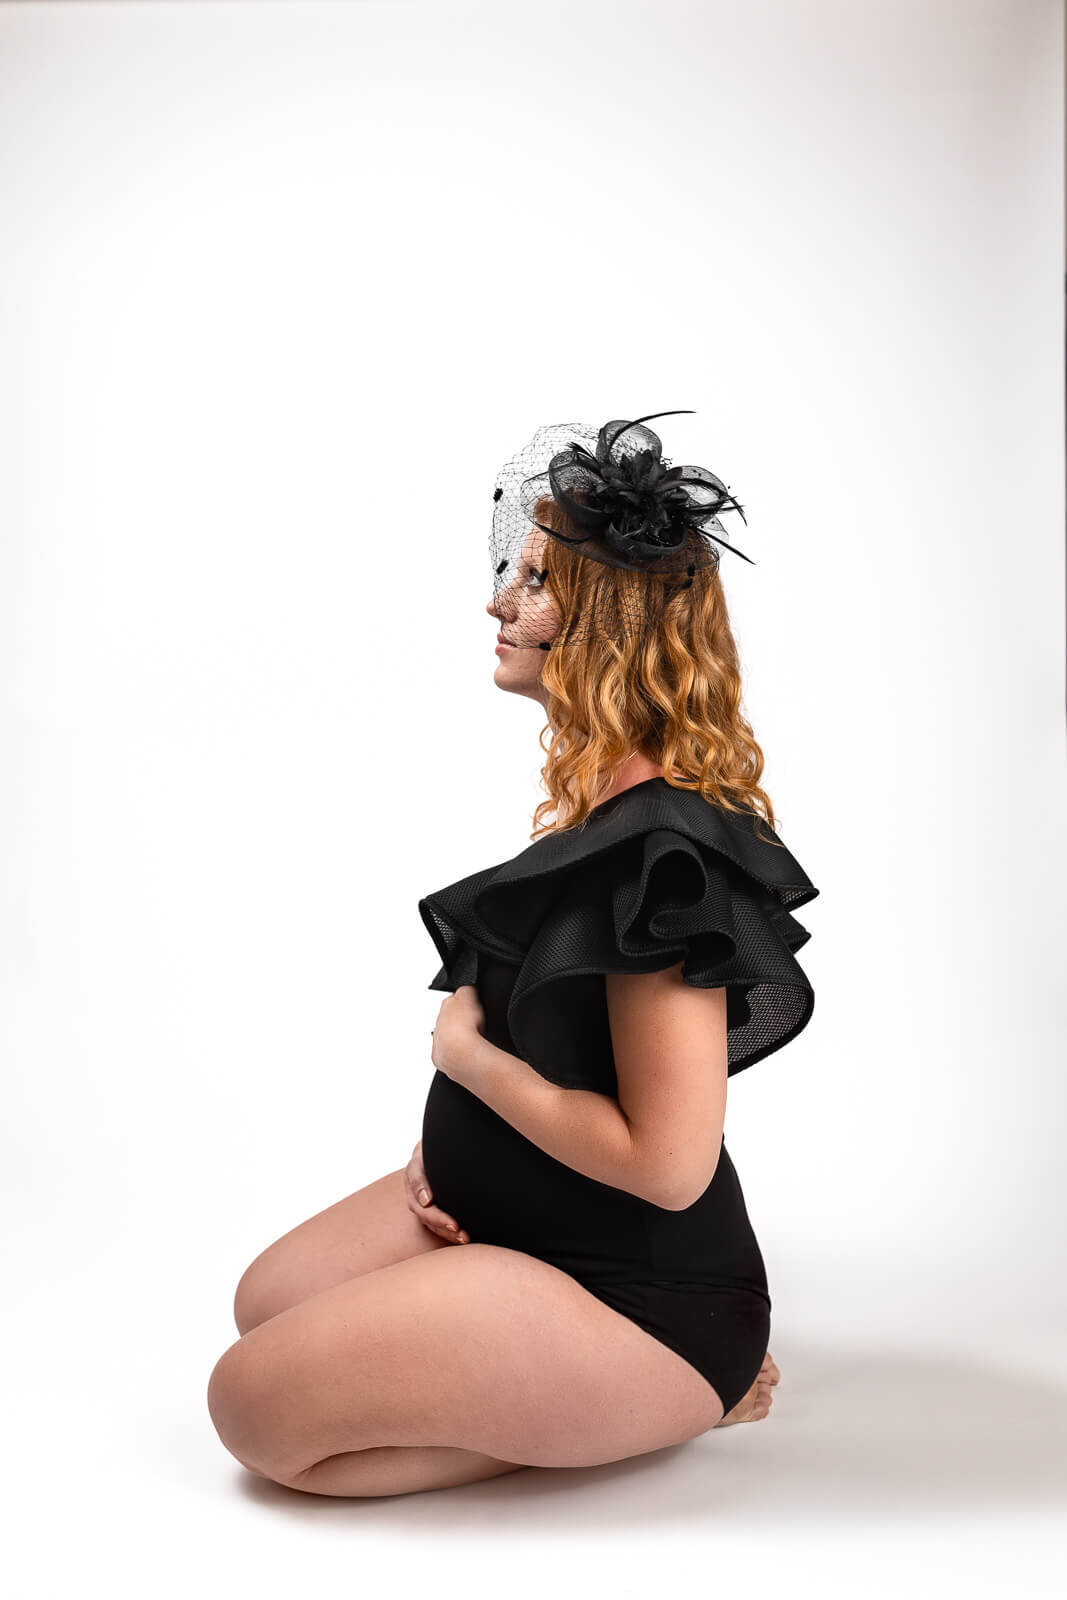 Maternity portrait of pregnant momma wearing a black body suit with birdcage hat.